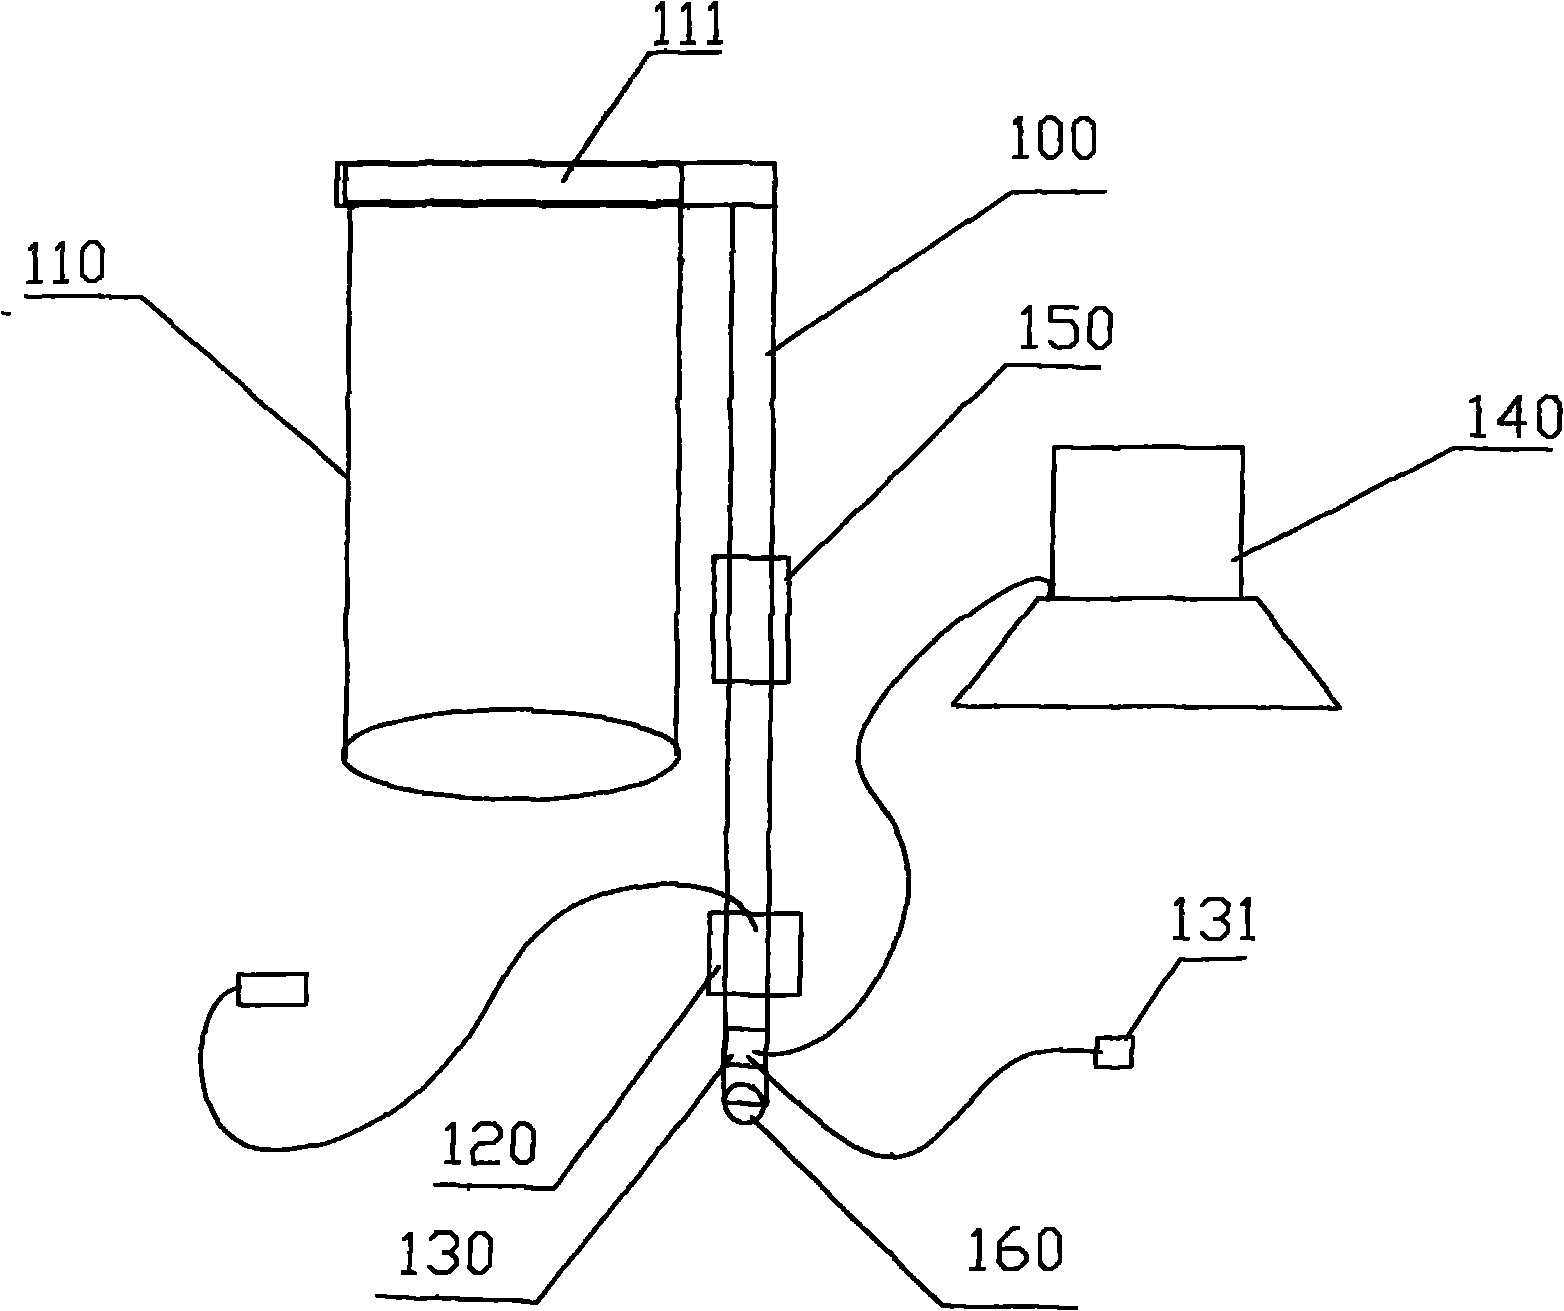 Military constant temperature apparatus for severely wounded personal